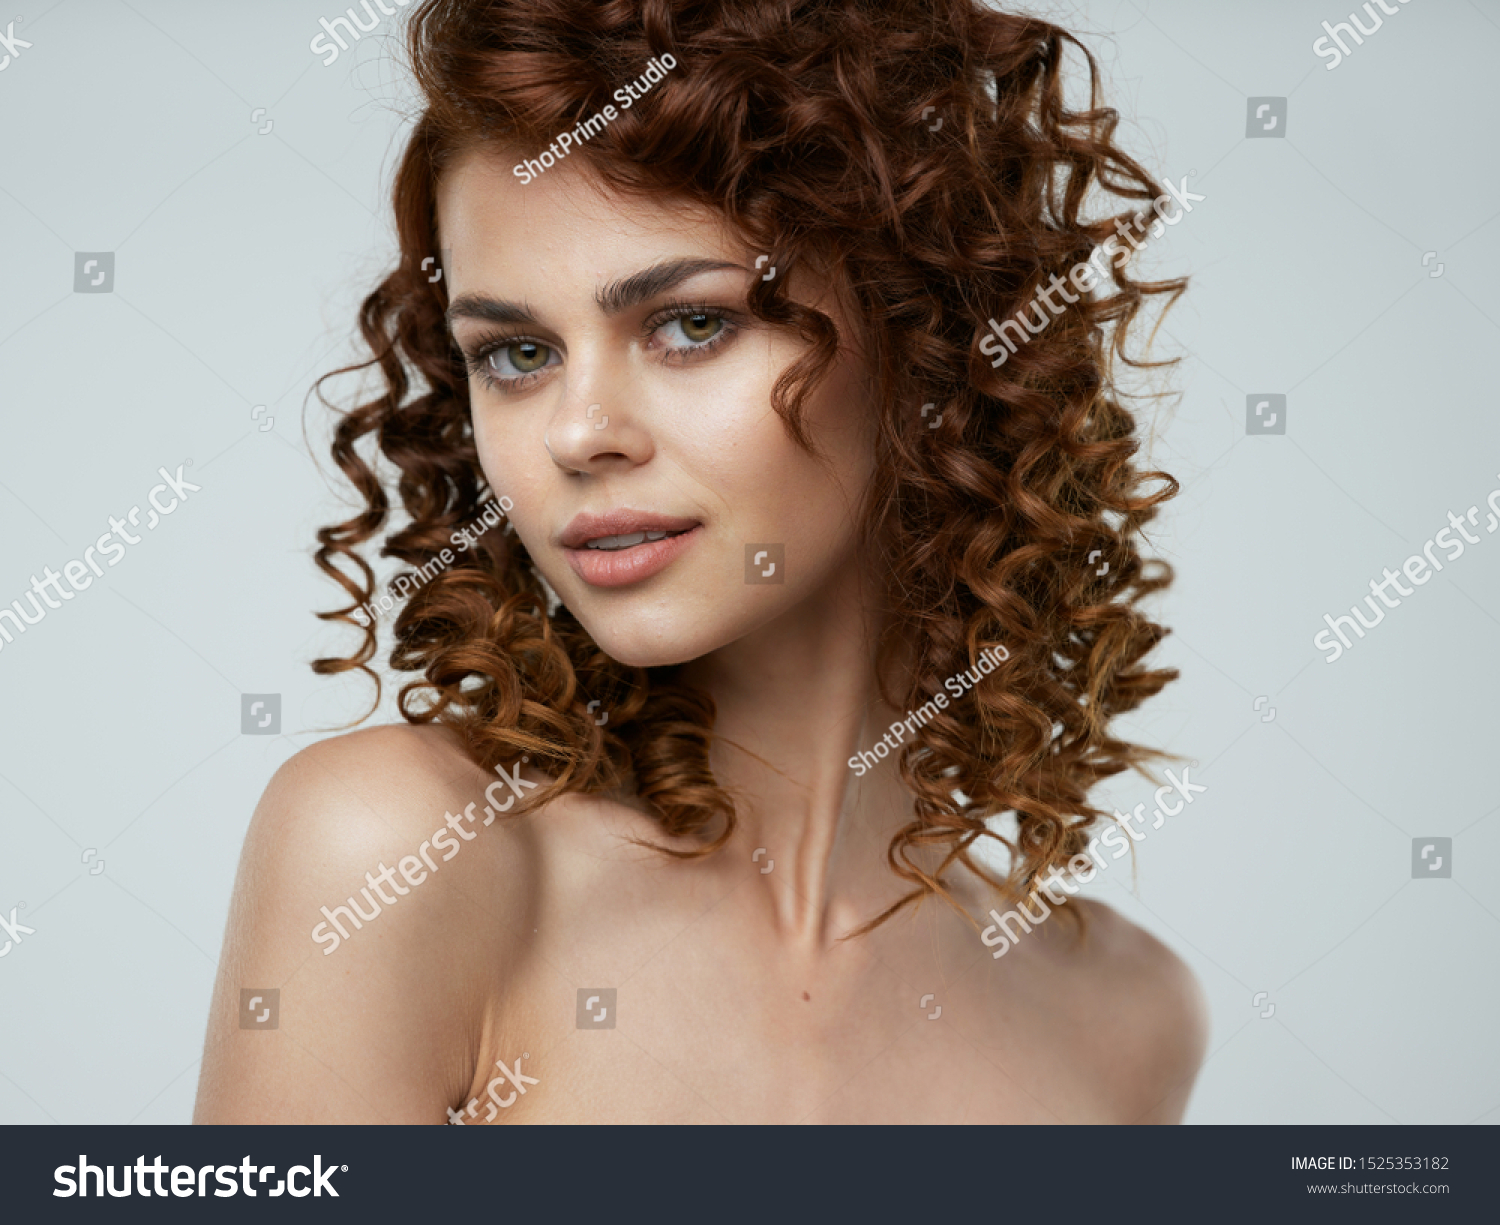 Naked Girls With Curly Hair